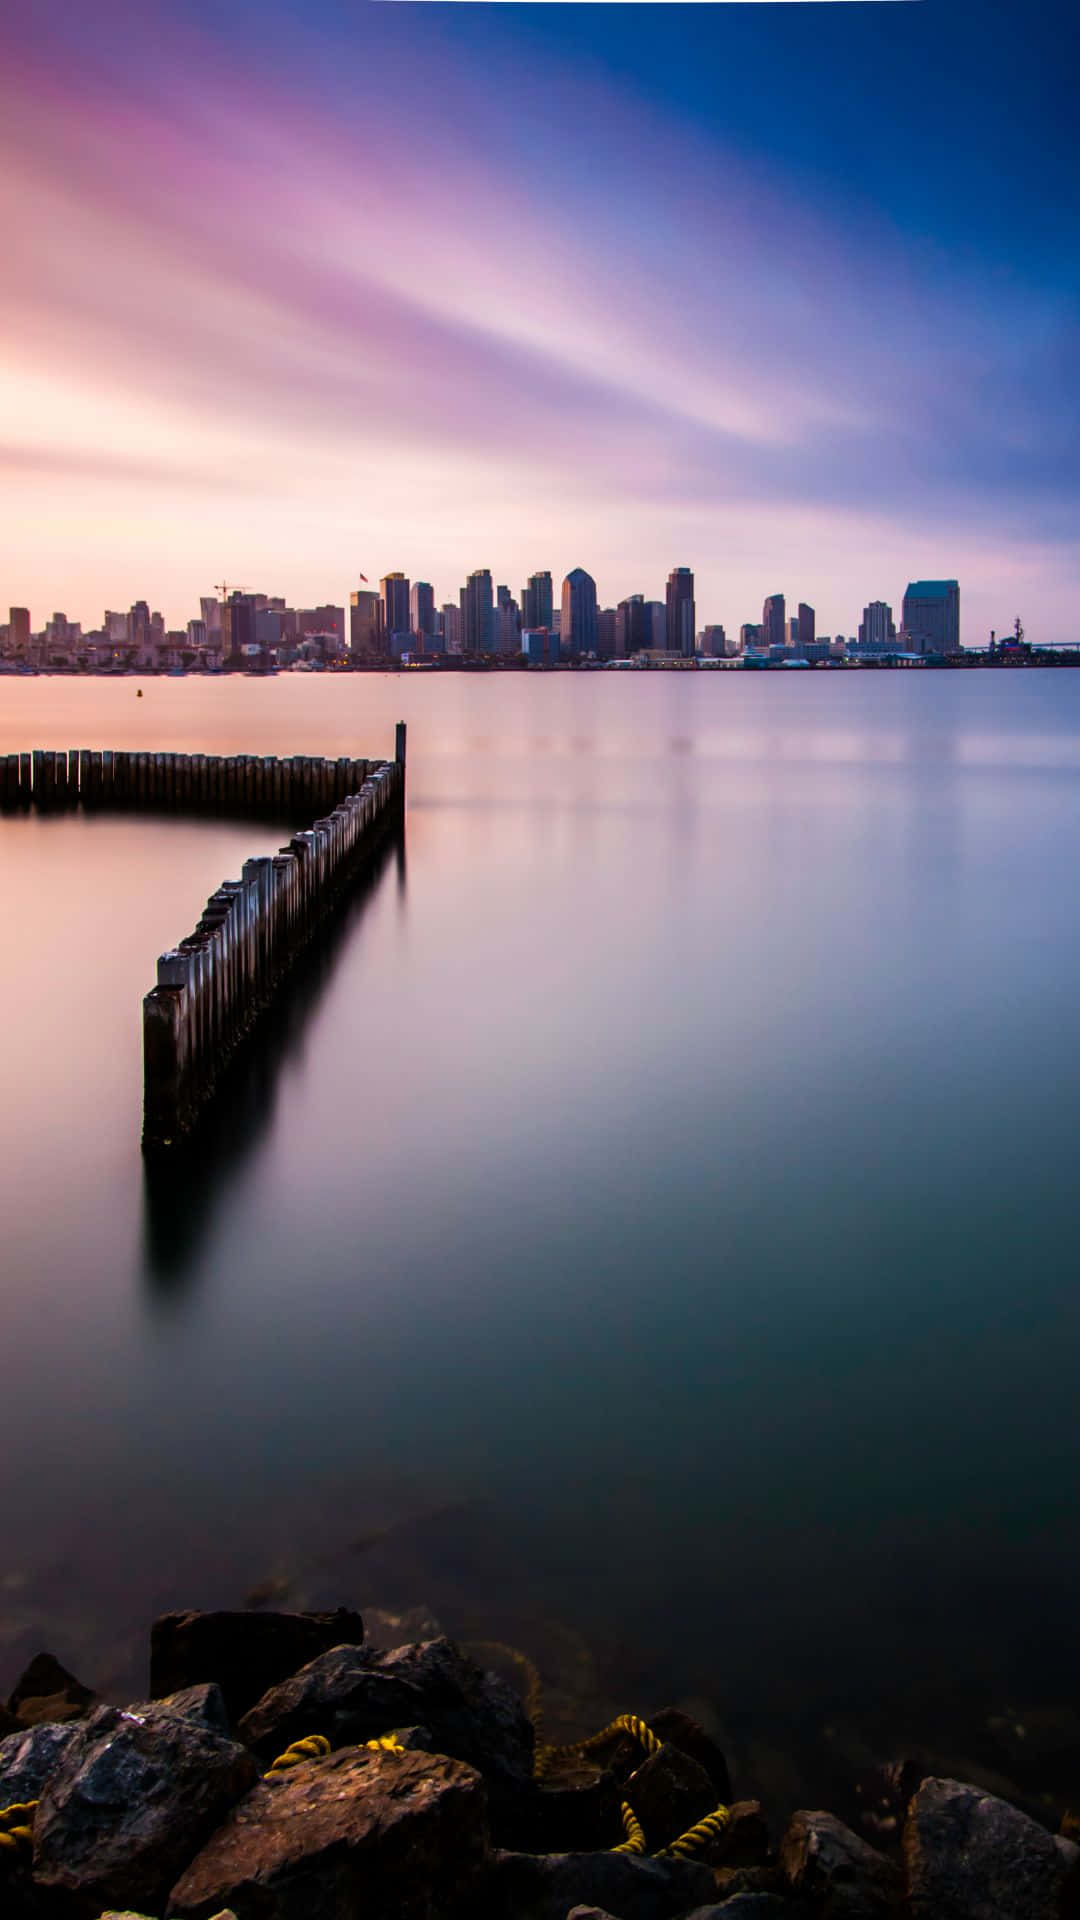 Enjoy San Diego's beautiful skyline from your iPhone Wallpaper